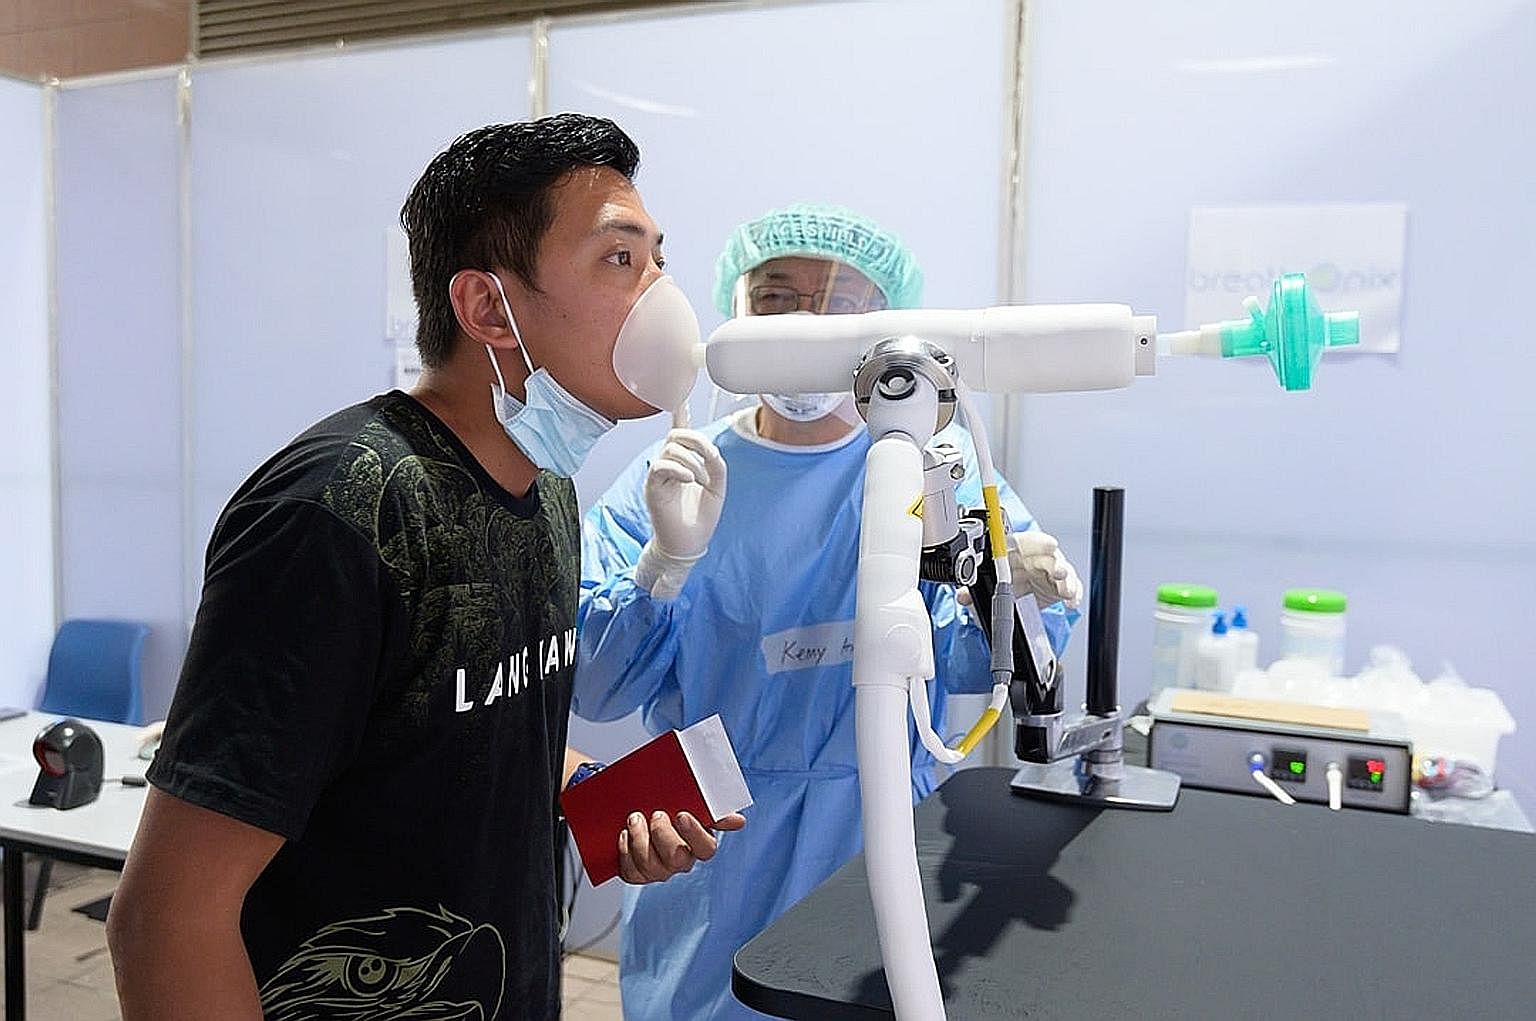 A trial for a new breathalyser test that can identify Covid-19 infections is taking place at Tuas Checkpoint. Finance Minister Lawrence Wong, in a post on Facebook yesterday, said he and Trade and Industry Minister Gan Kim Yong visited the checkpoint